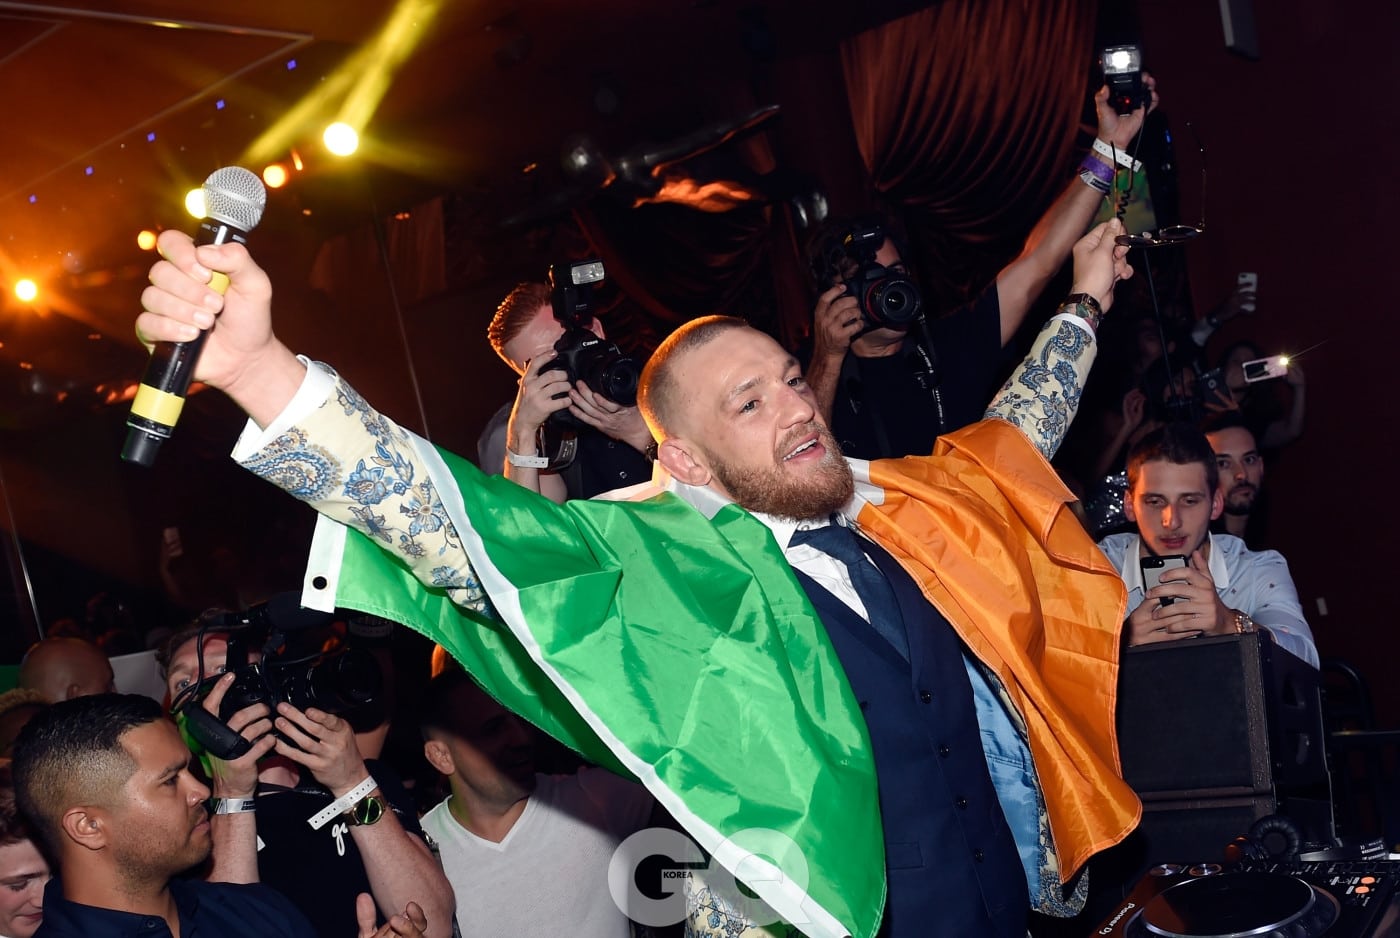 LAS VEGAS, NV - AUGUST 27:  Conor McGregor attends his after fight party and his Wynn Nightlife residency debut at the Encore Beach Club at Night at Wynn Las Vegas on August 27, 2017 in Las Vegas, Nevada.  (Photo by David Becker/Getty Images for Wynn Nightlife)